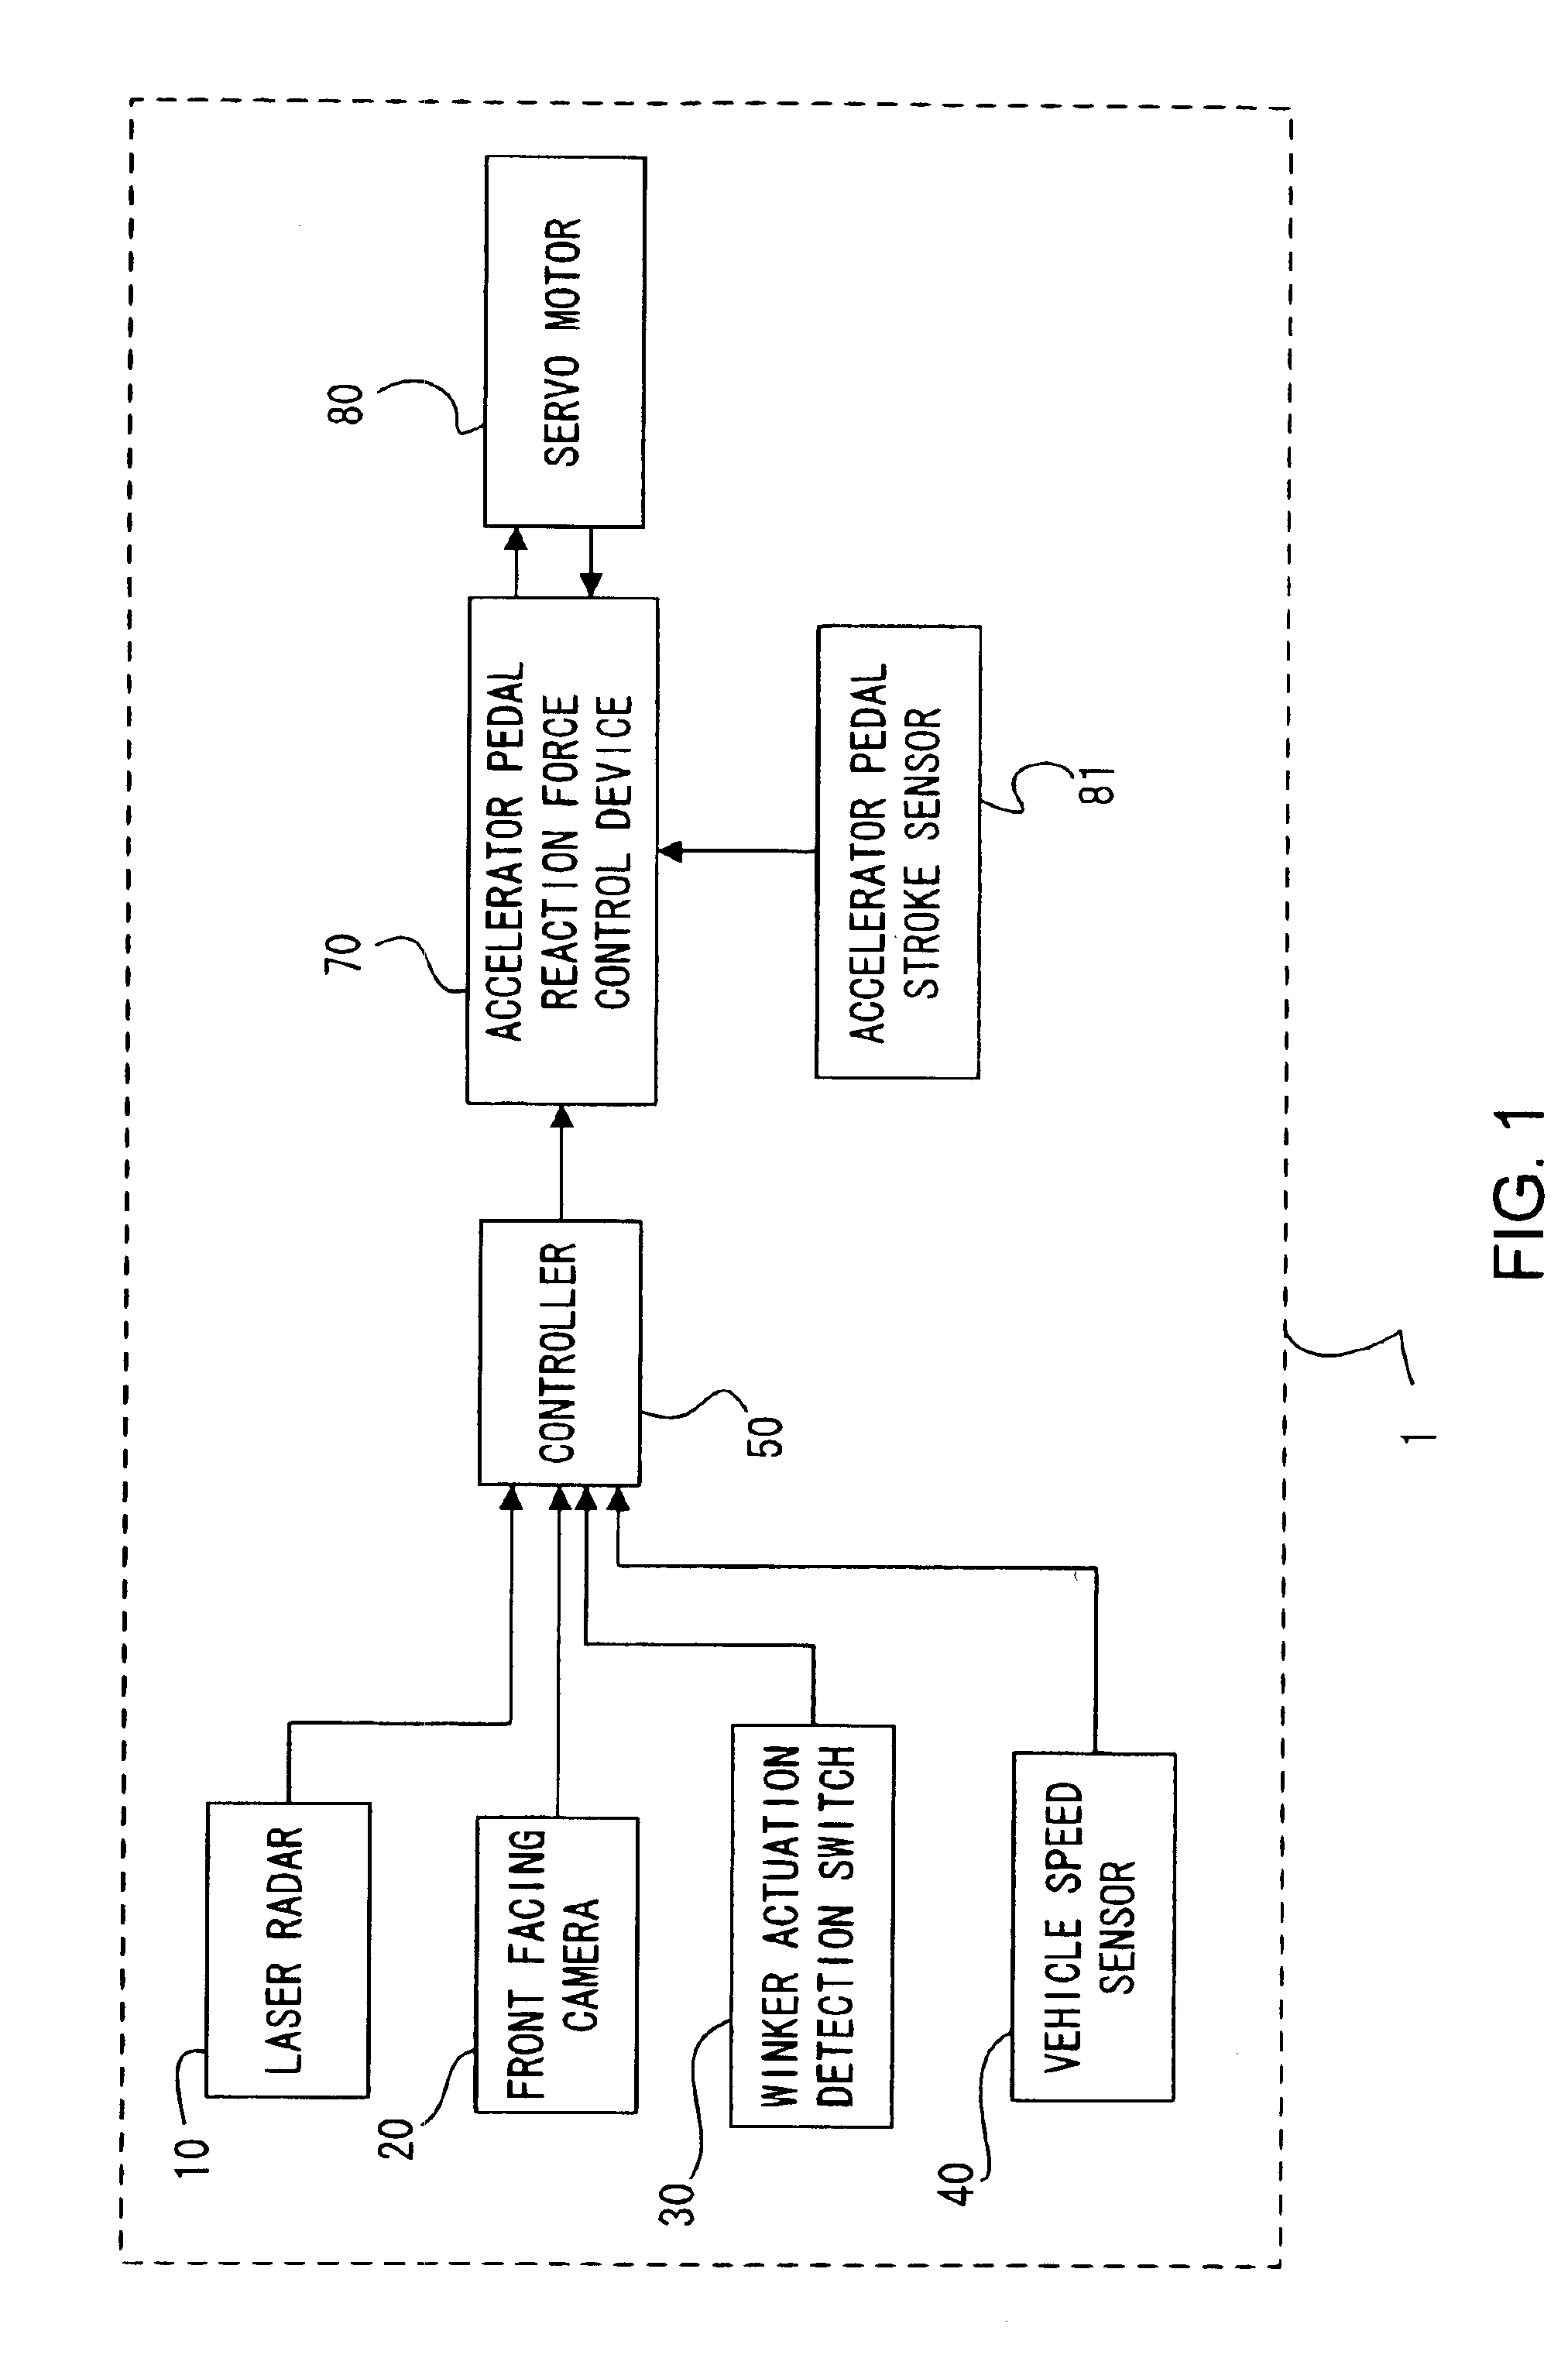 Driving assist system for vehicle